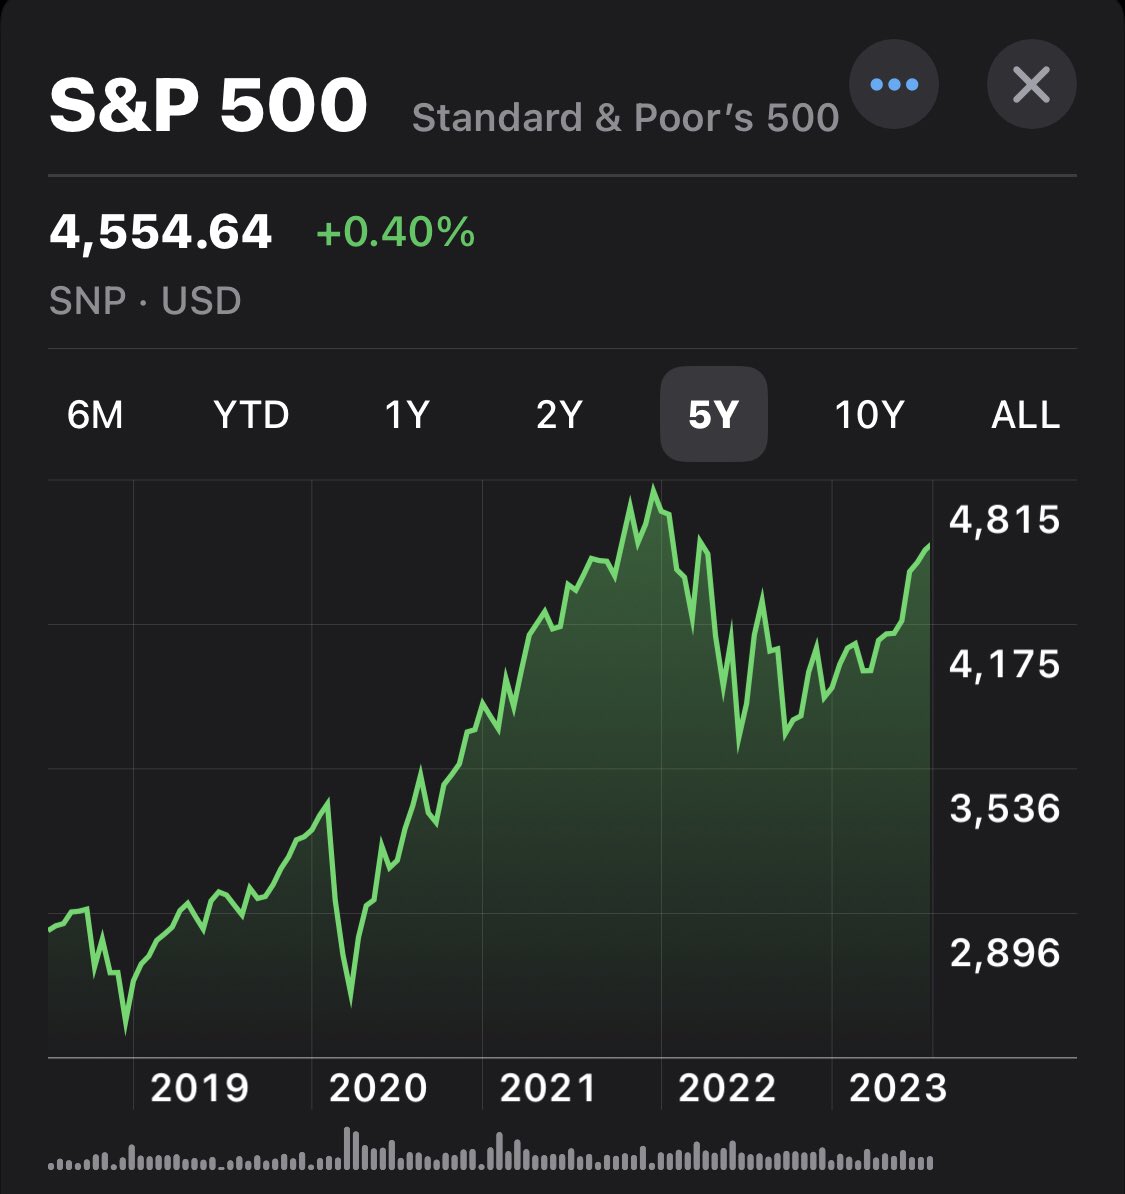 RT @cadeinvests: The S&P 500 is only 5% from a new all time high.

That’s the tweet. https://t.co/MFQbrWTZAb